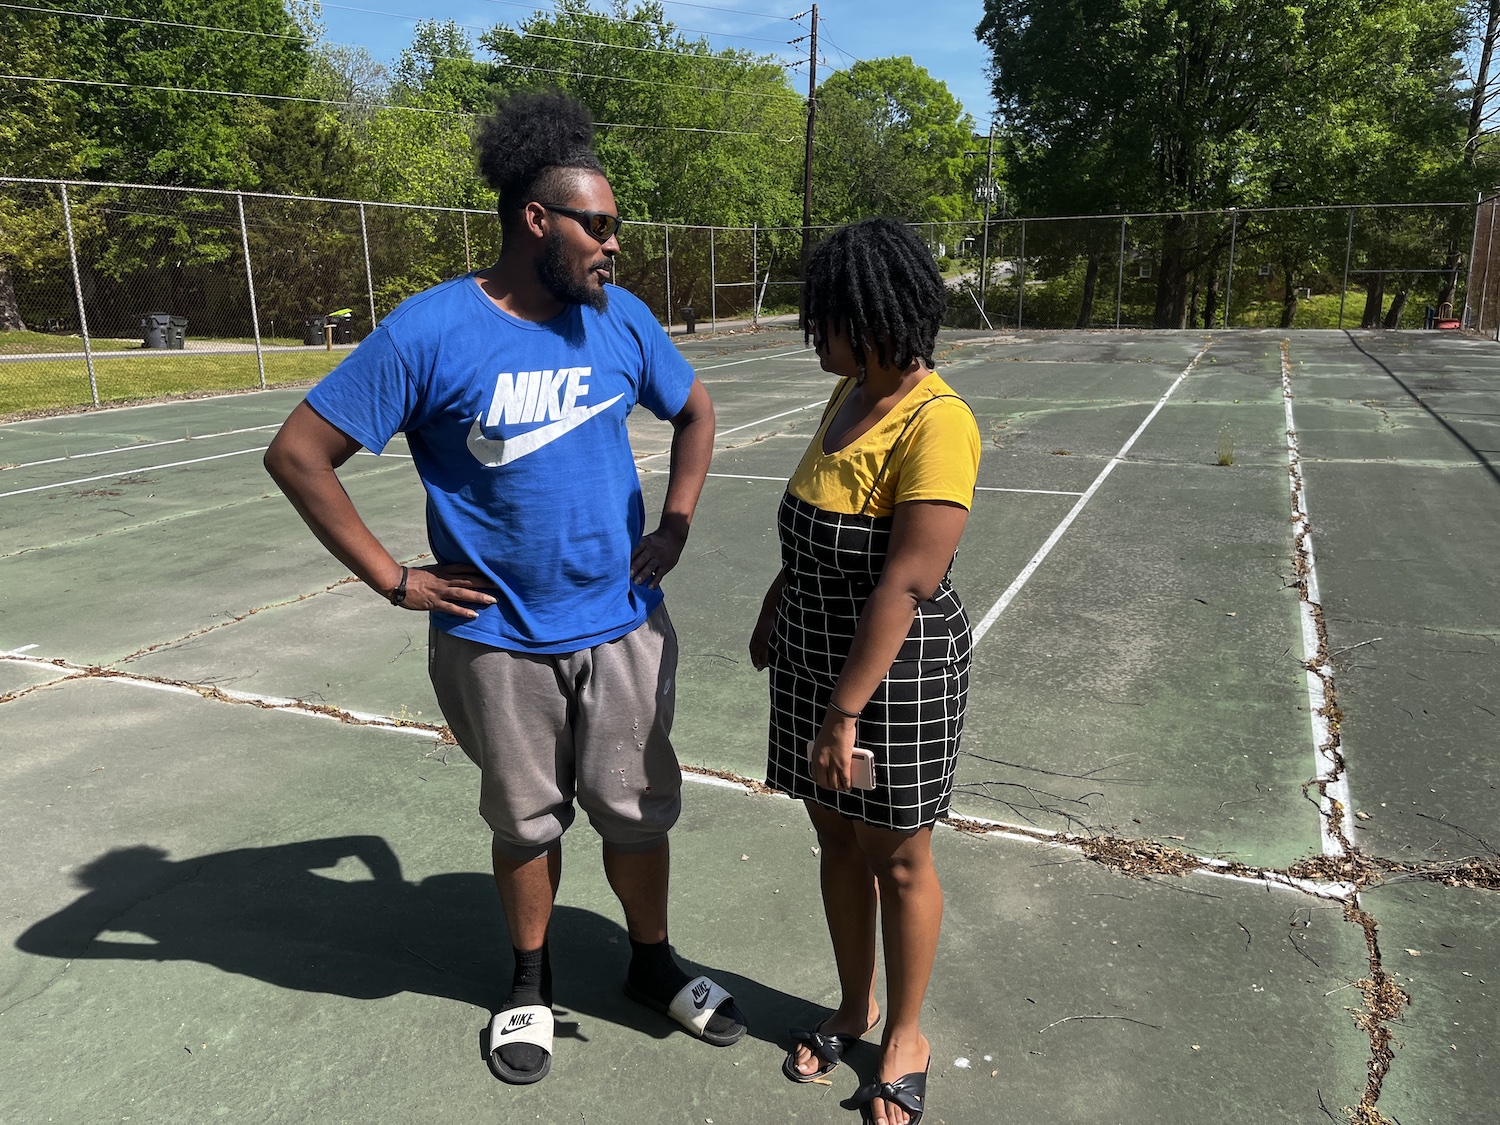 Members William Johnson and Myla Pettiford stand in the location of the old basketball courts in Granville Street Park in Oxford, N.C.. The city took out the nets and put in a tennis court, then took out the nets for the tennis court. The space has been abandoned and become a cracked concrete slab. But our members have talked with community members and there's a new vision for what used to be a thriving public space. It can become a hub for kids and families again!